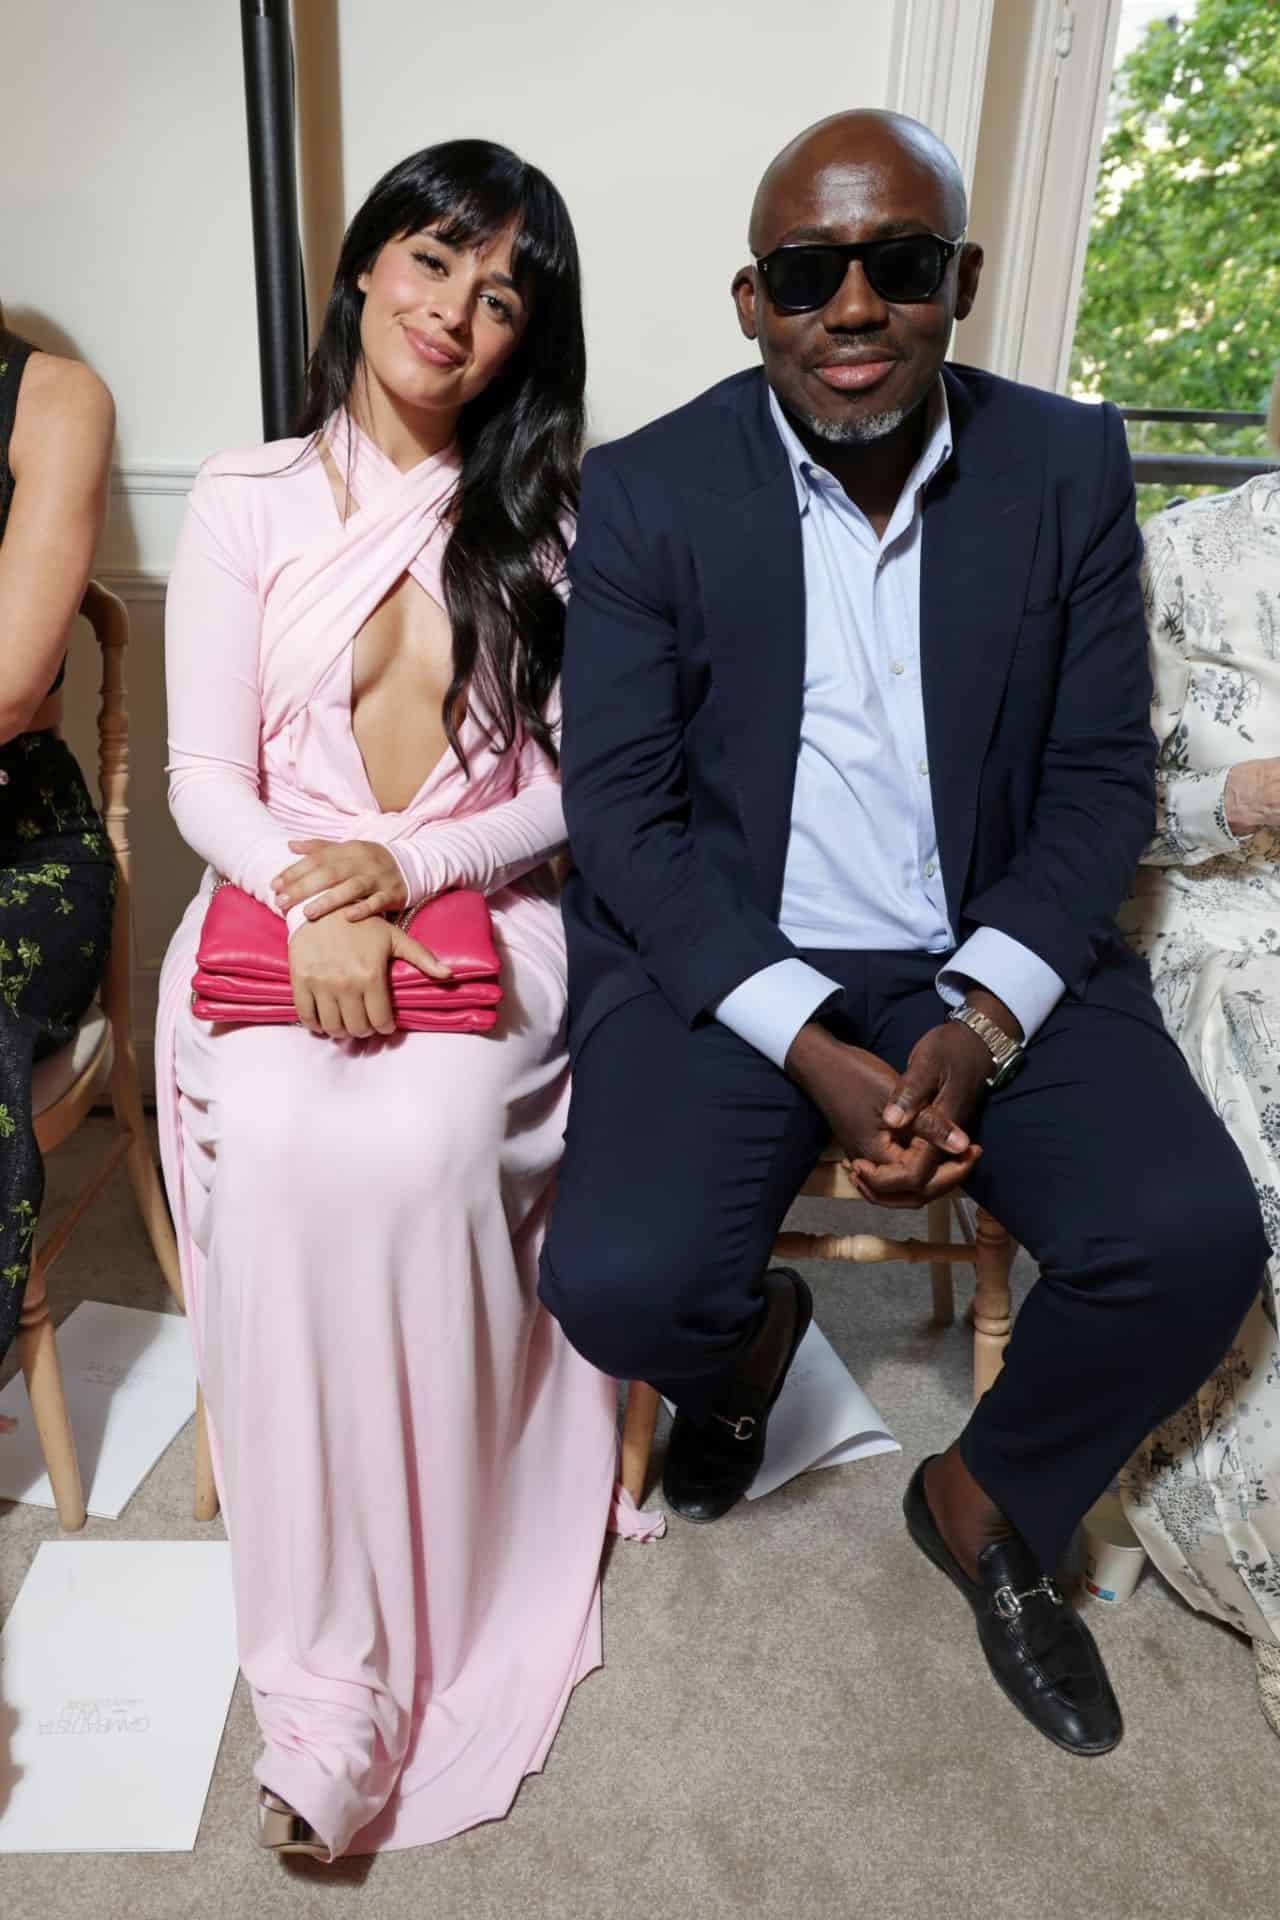 Camila Cabello Turns Heads in a Stunning Pink Gown at Paris Fashion Week